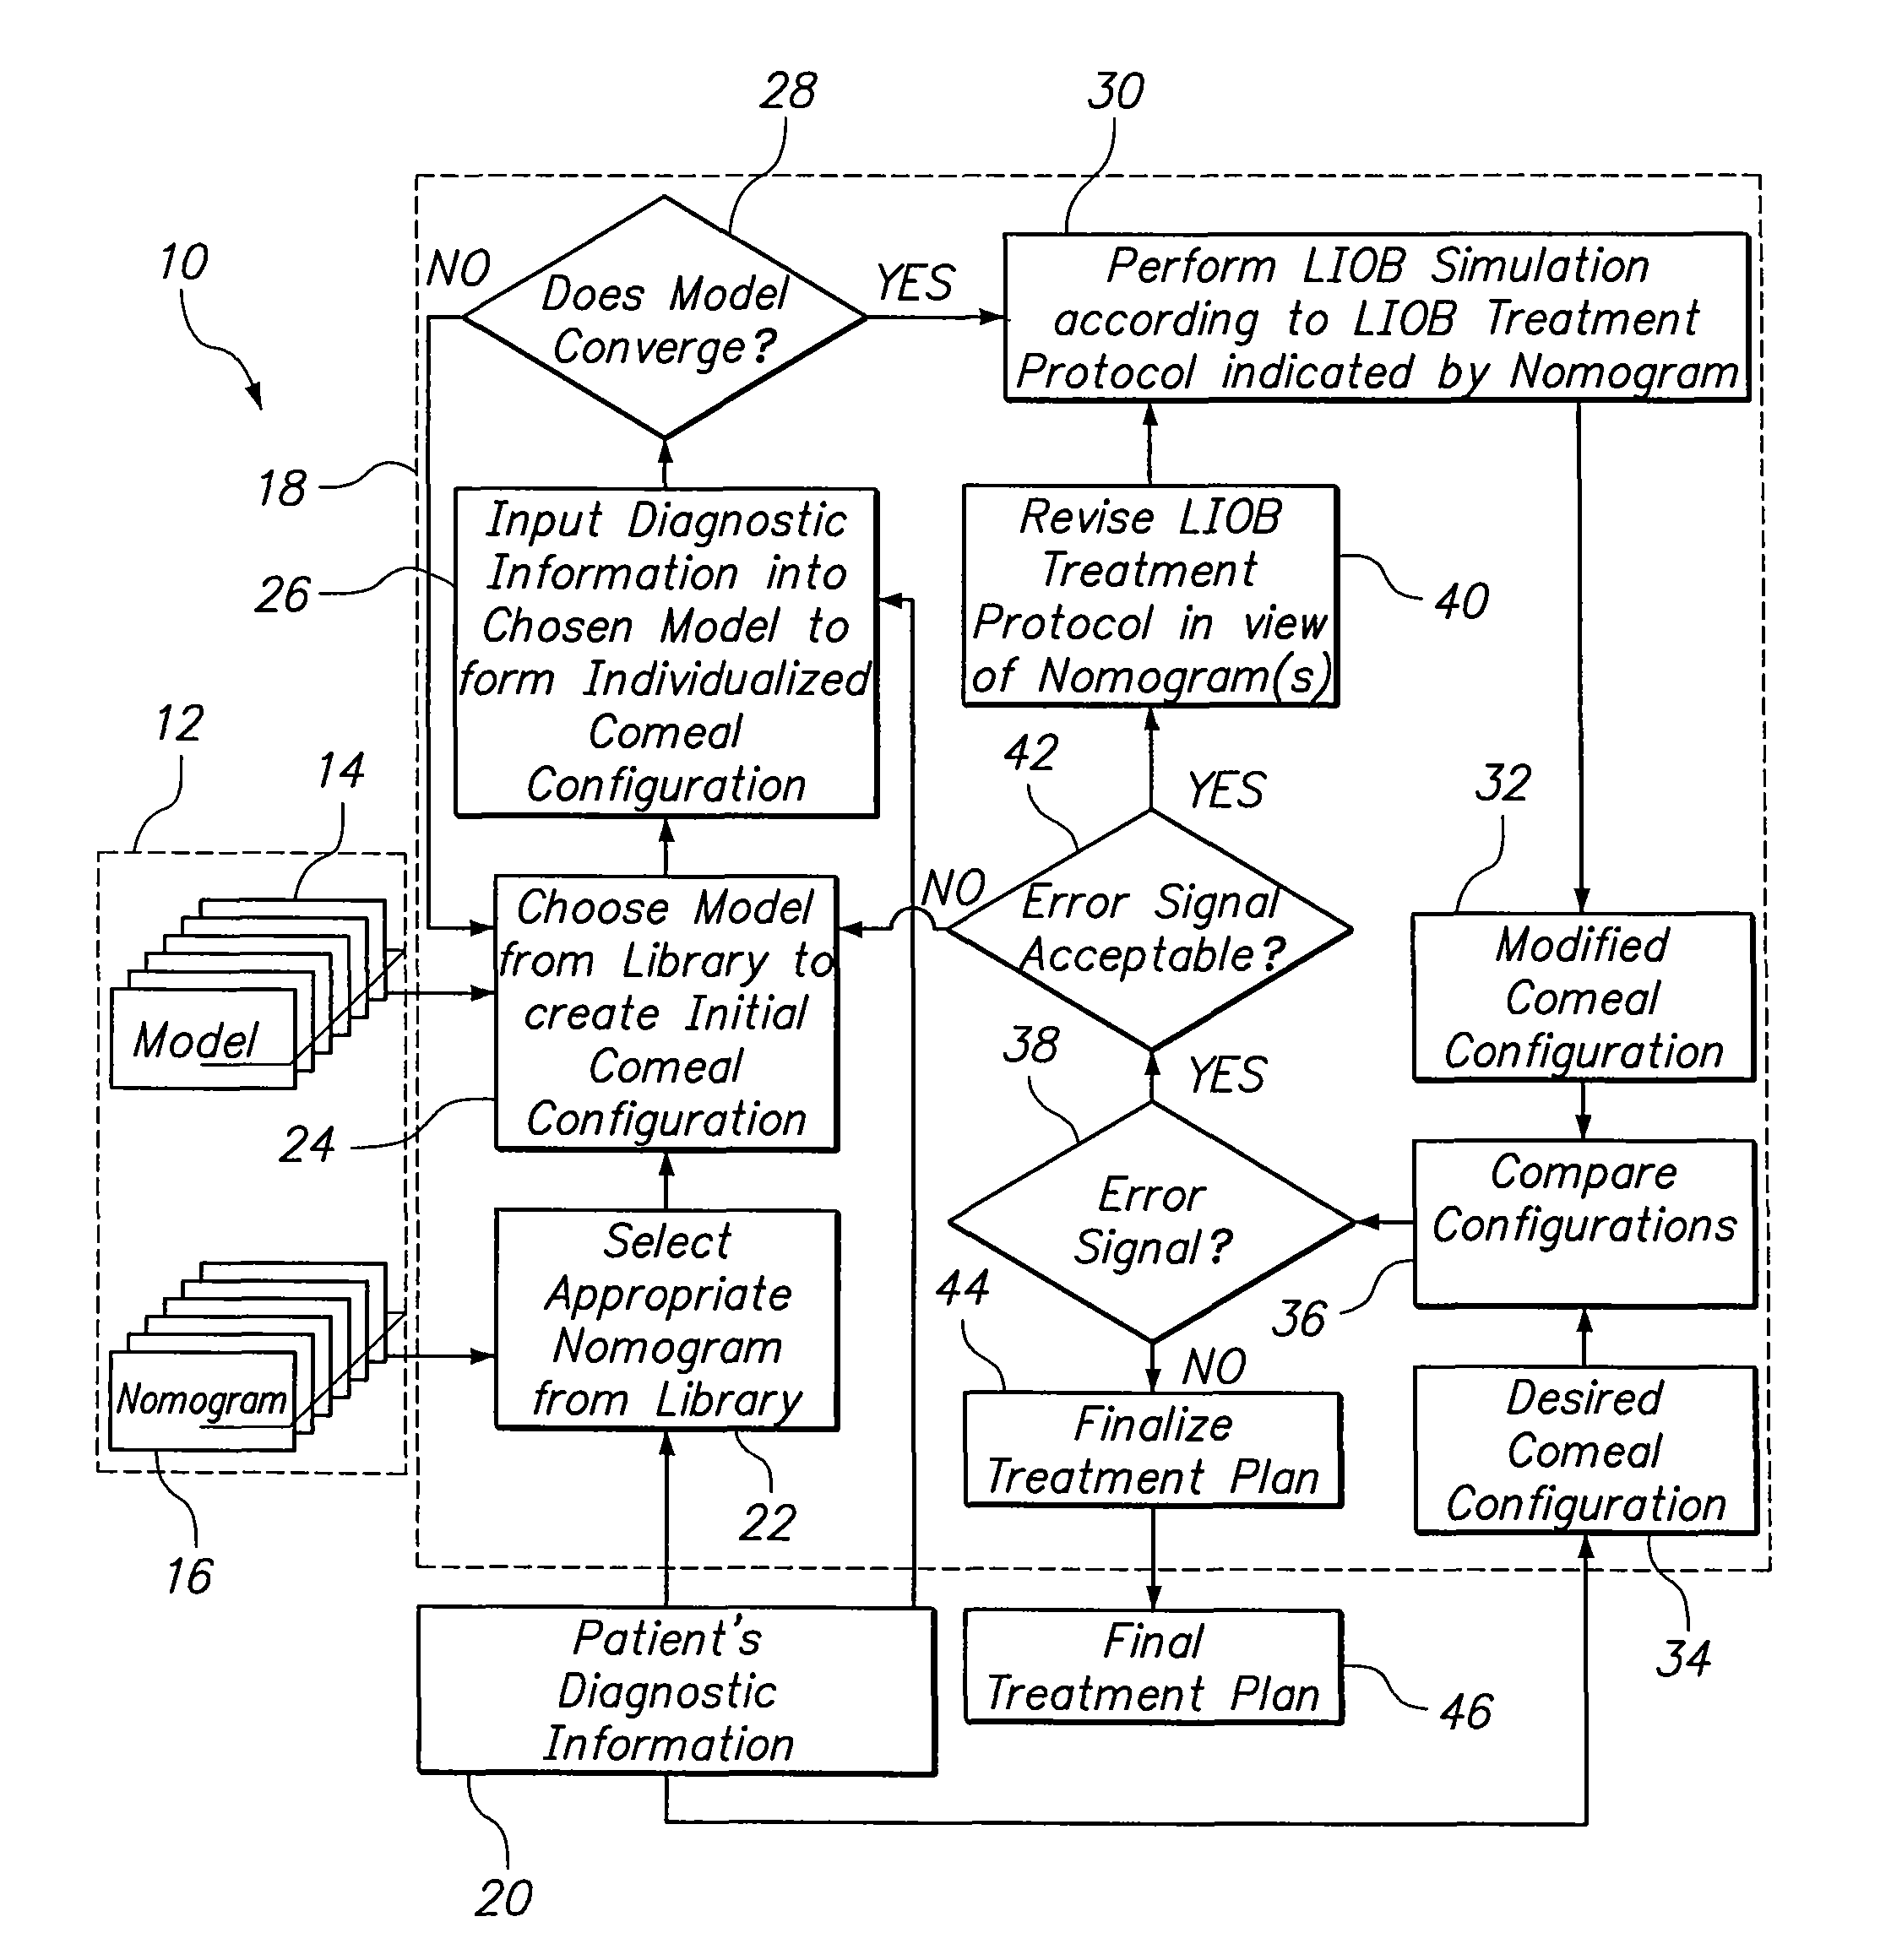 System and method for simulating an LIOB protocol to establish a treatment plan for a patient